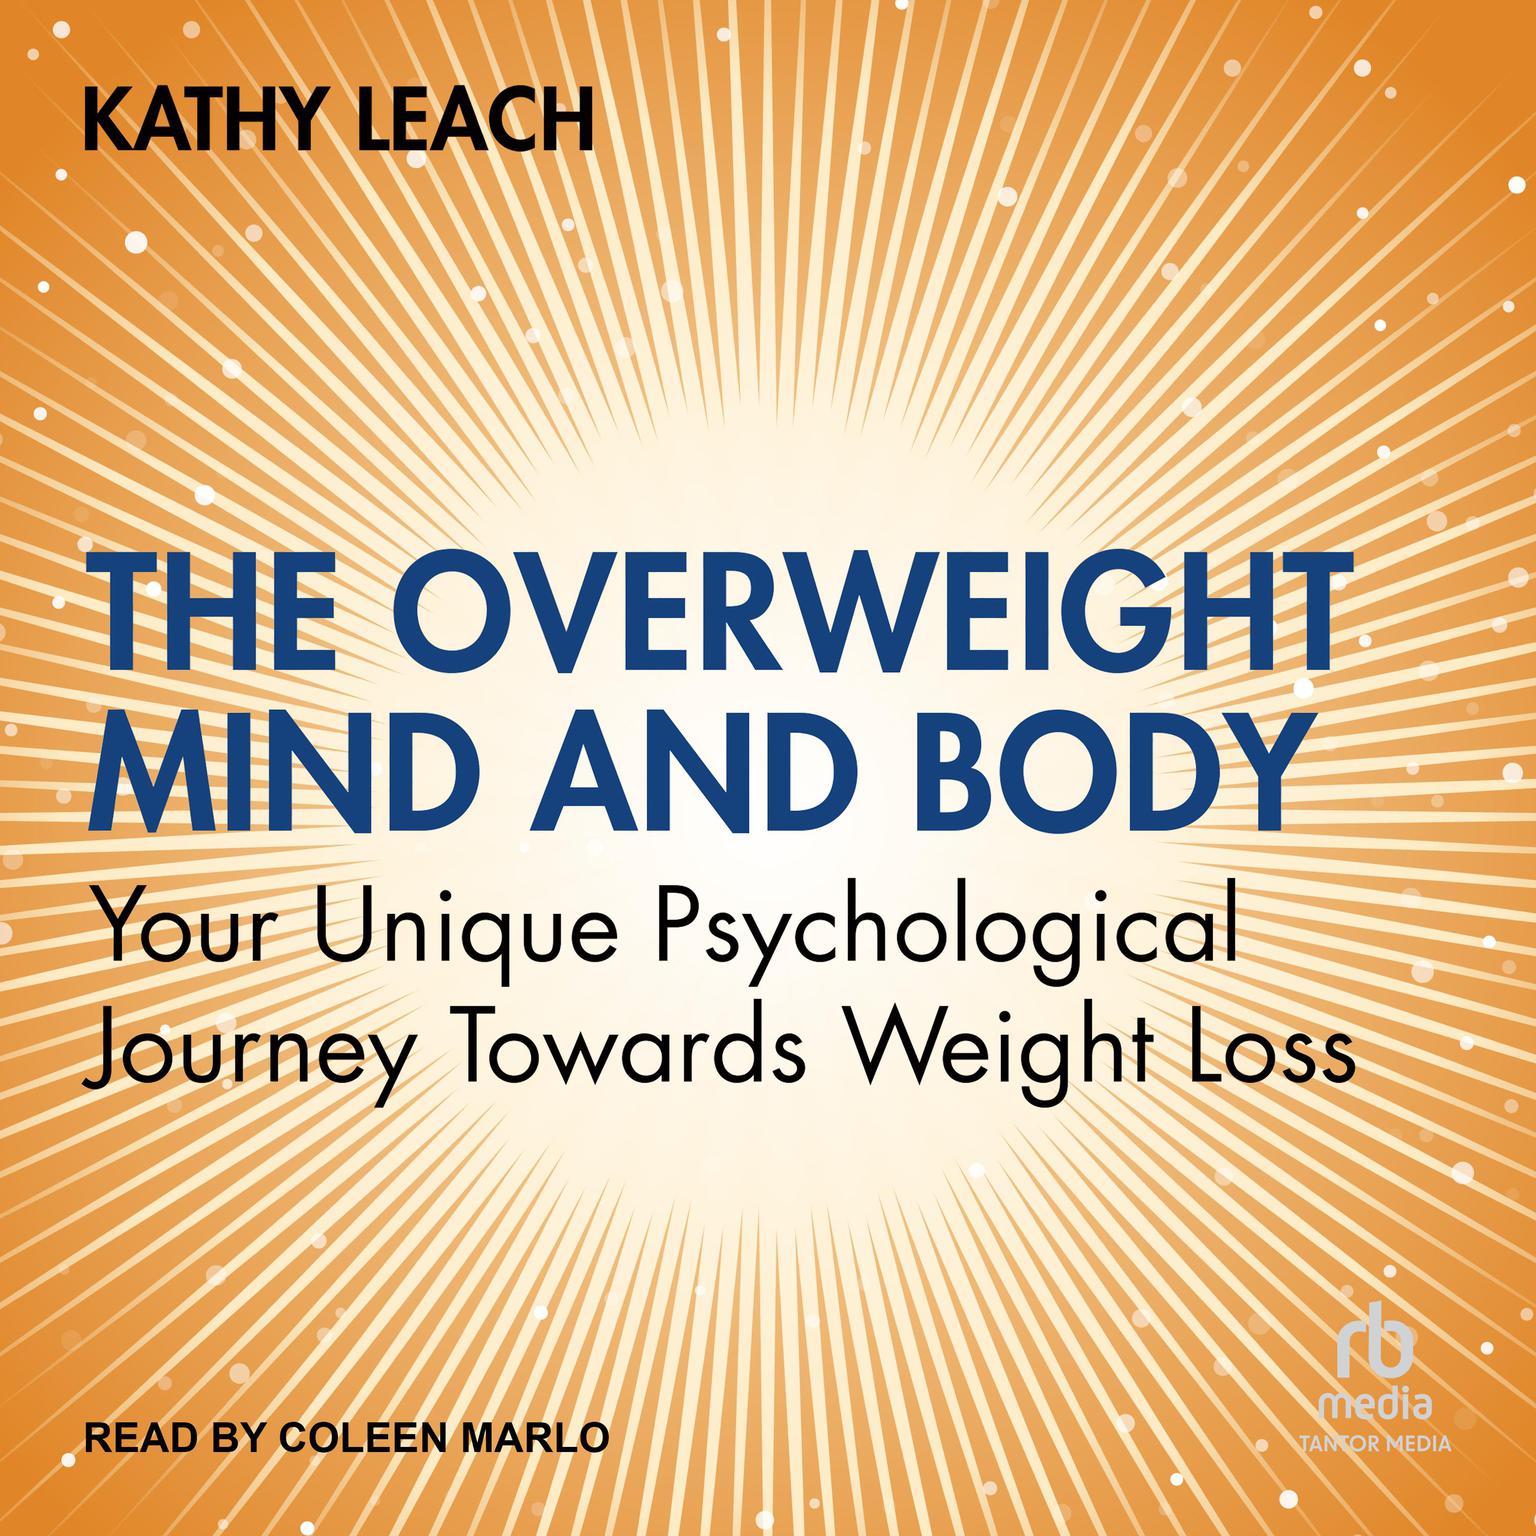 The Overweight Mind and Body: Your Unique Psychological Journey Towards Weight Loss Audiobook, by Kathy Leach